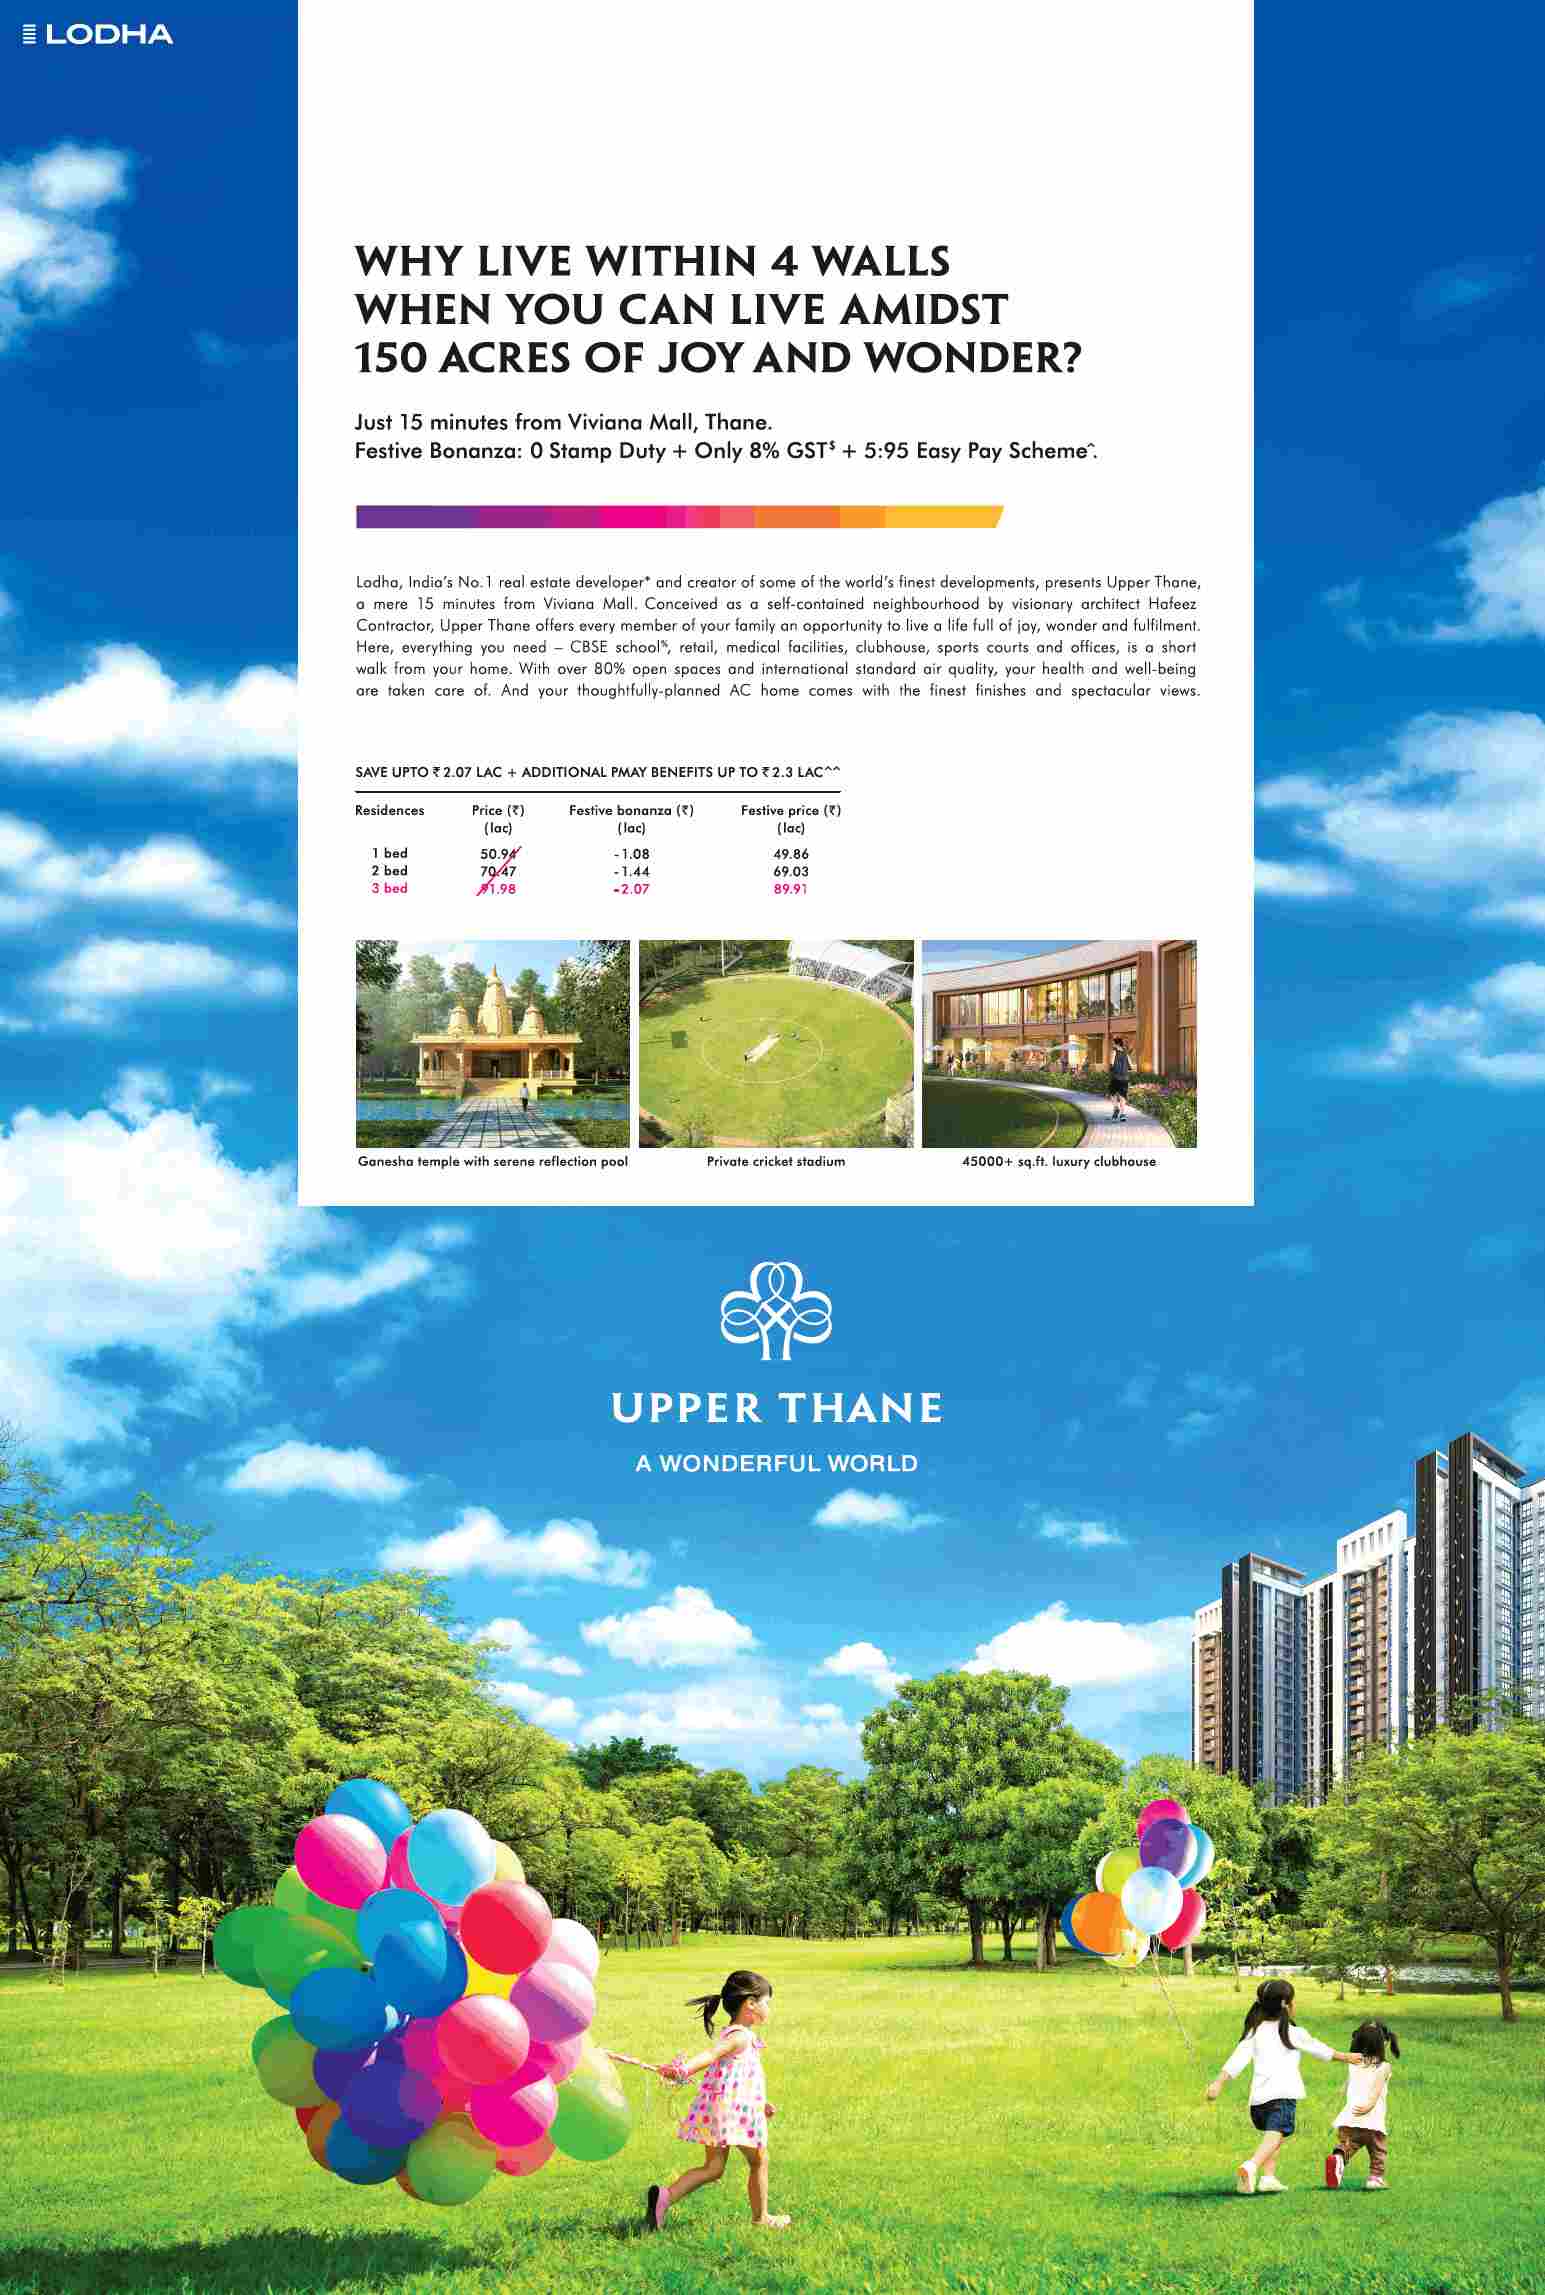 Save up to Rs 2.07 Lac & additional PMAY benefit up to Rs 2.3 Lac at Lodha Upper Thane in Mumbai Update